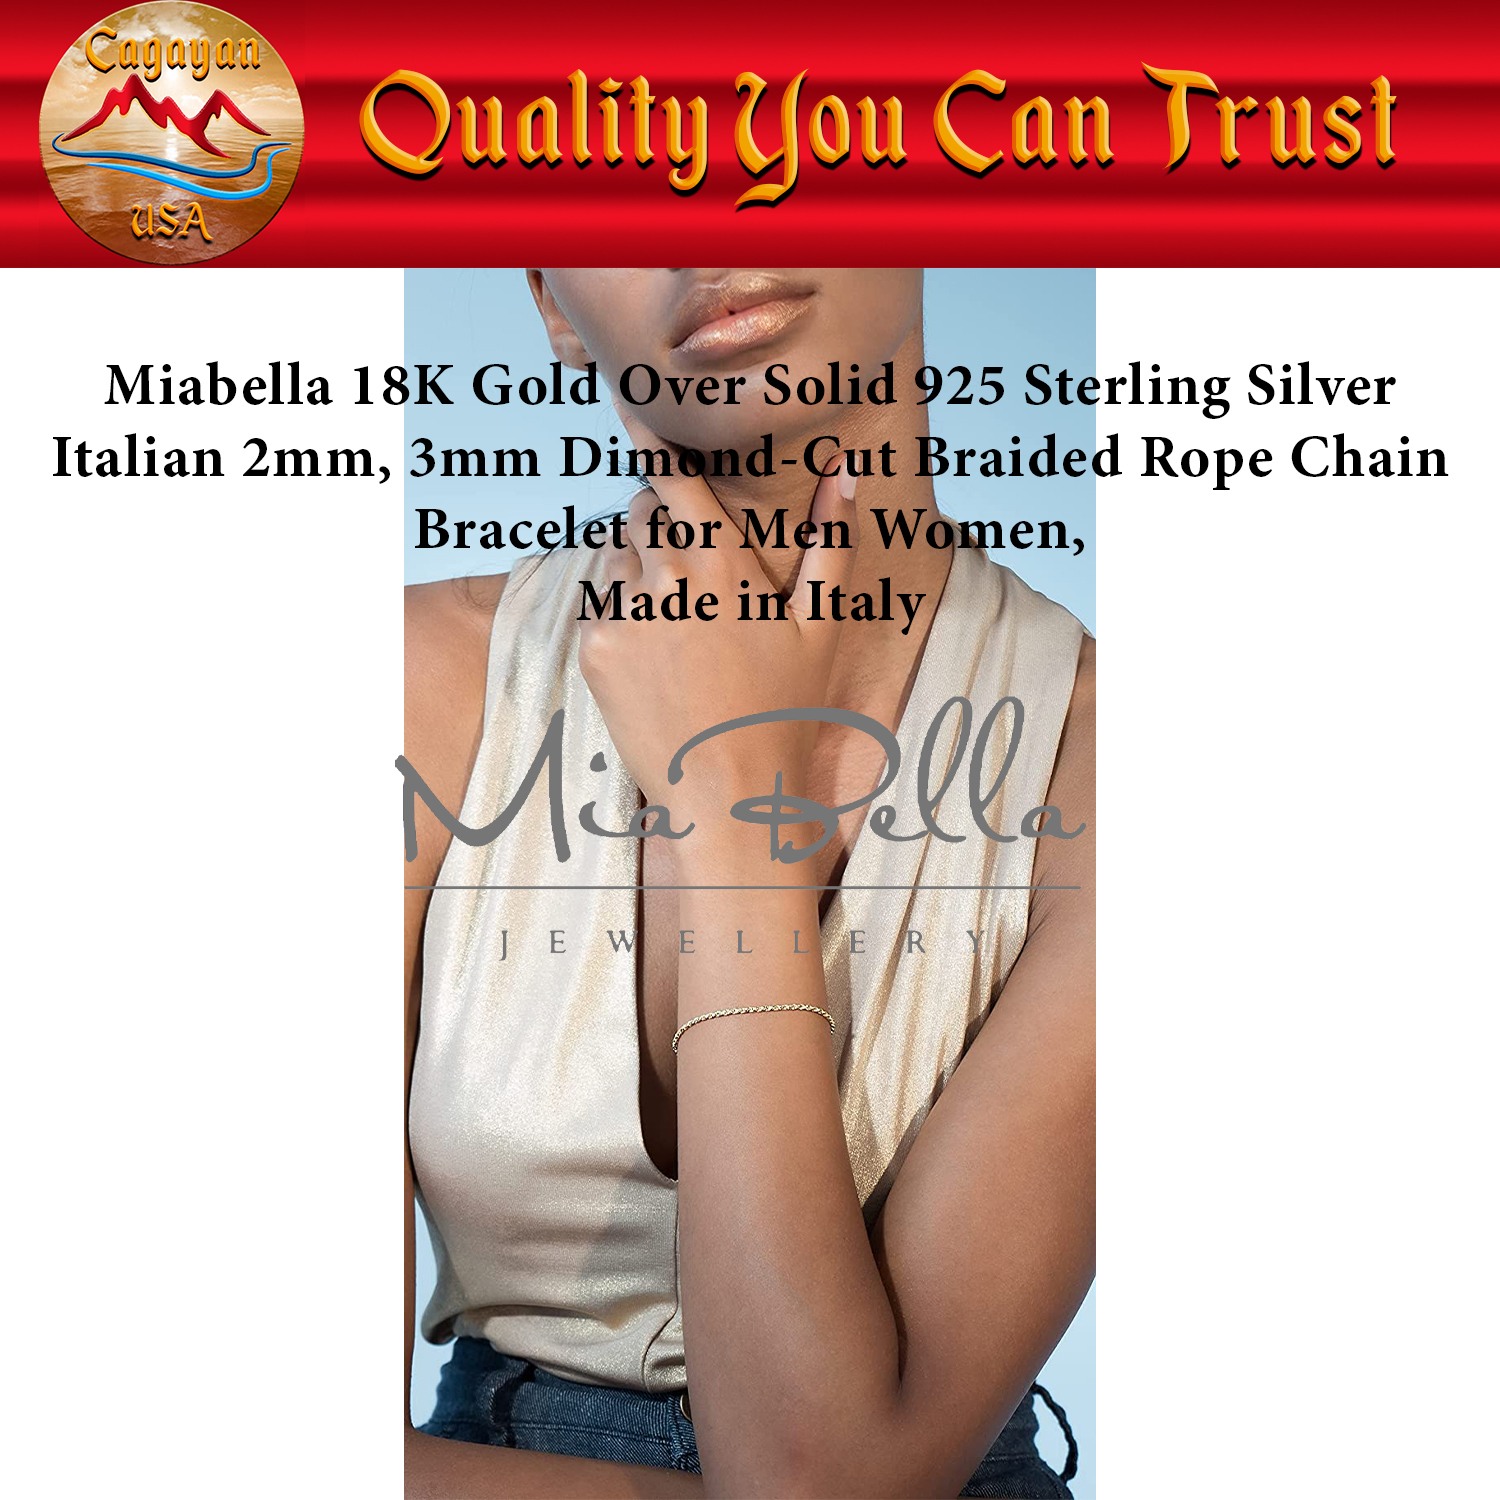 Miabella Solid 925 Sterling Silver Italian 2mm, 3mm Diamond-Cut Braided Rope Chain Bracelet for Women Men, Made in Italy